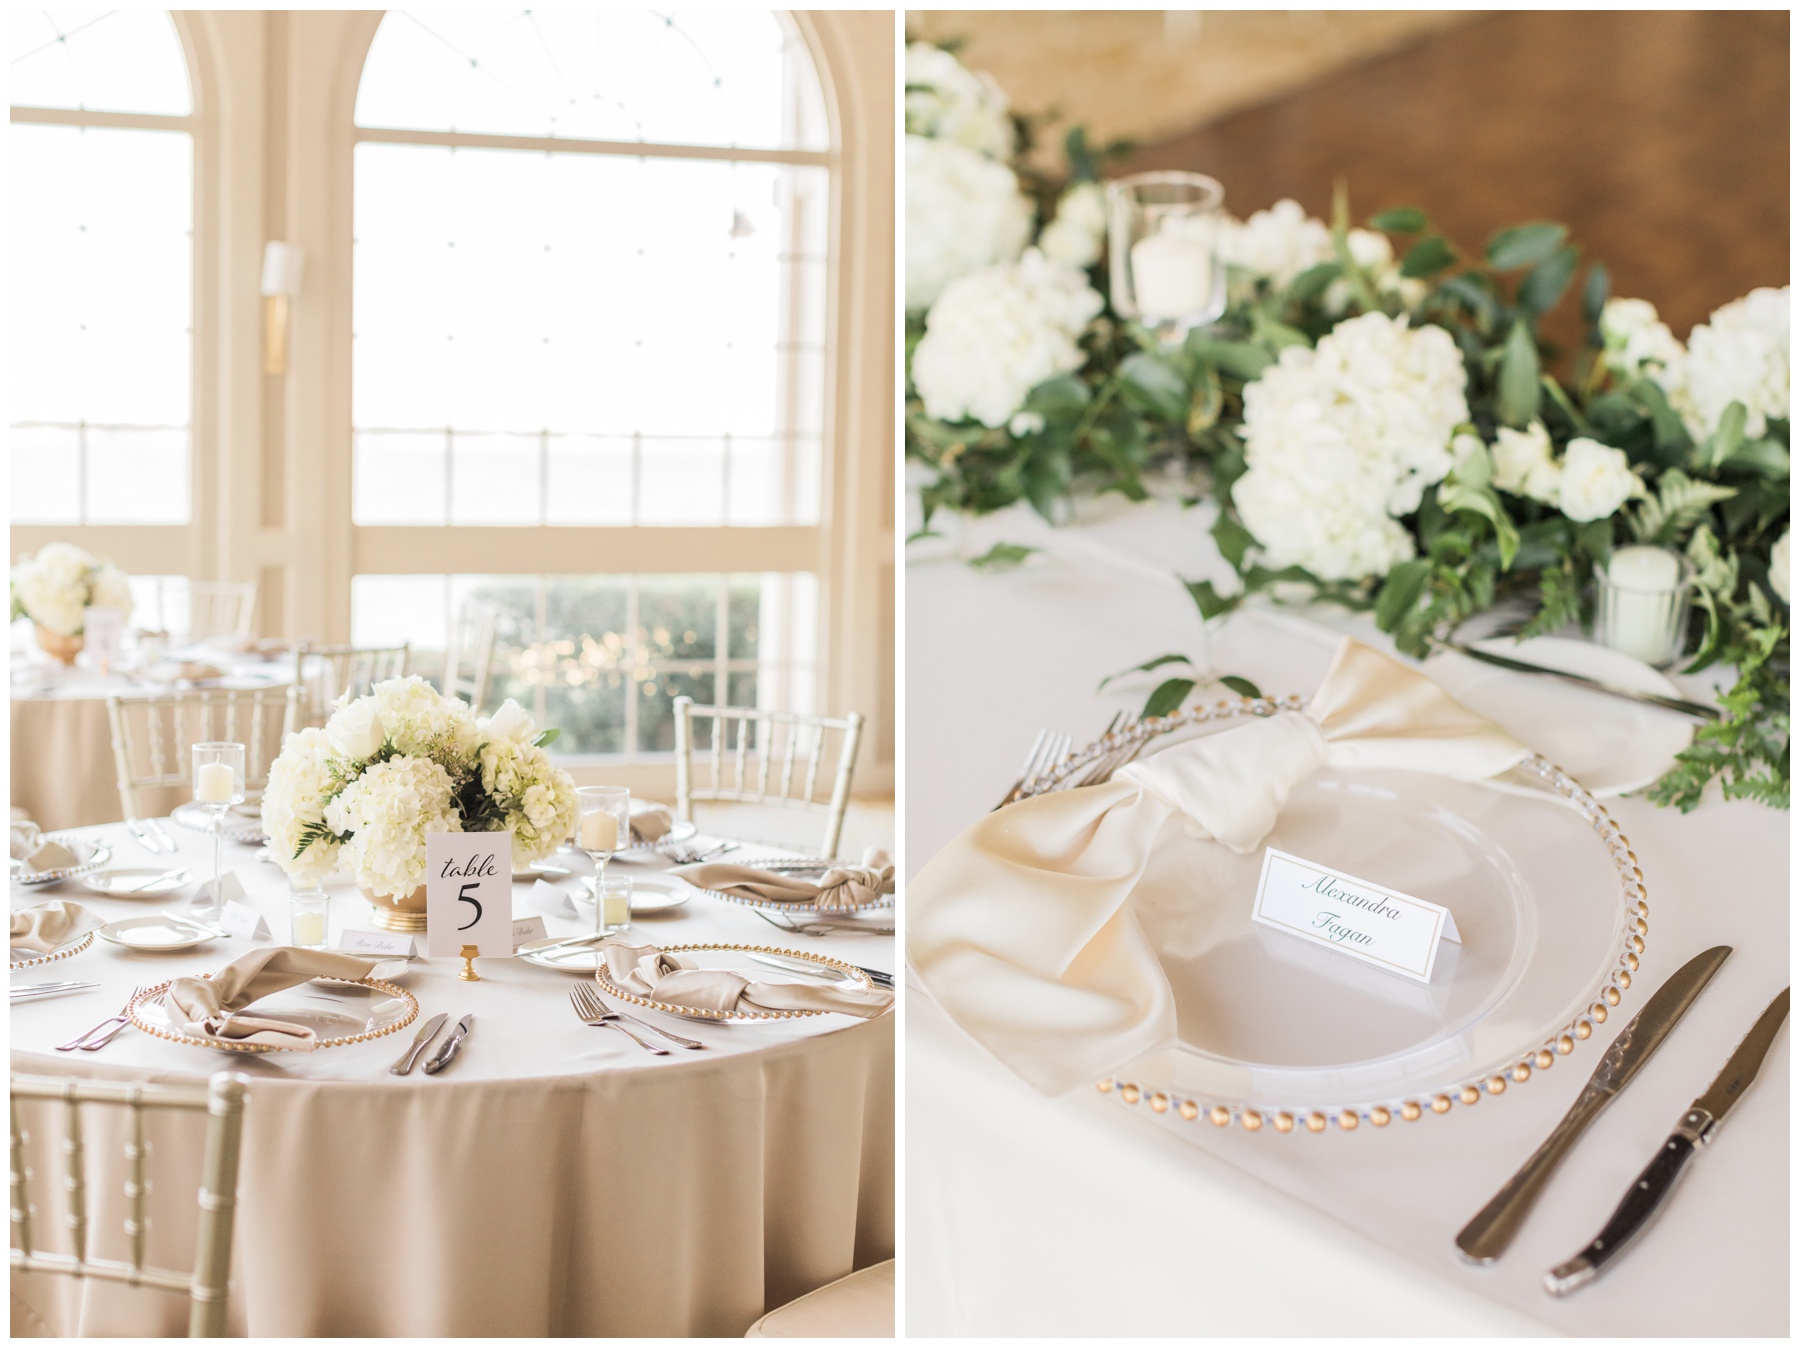 Tablescapes with cream linens, gold-rimmed chargers, and white hydrangeas at an elegant wedding reception